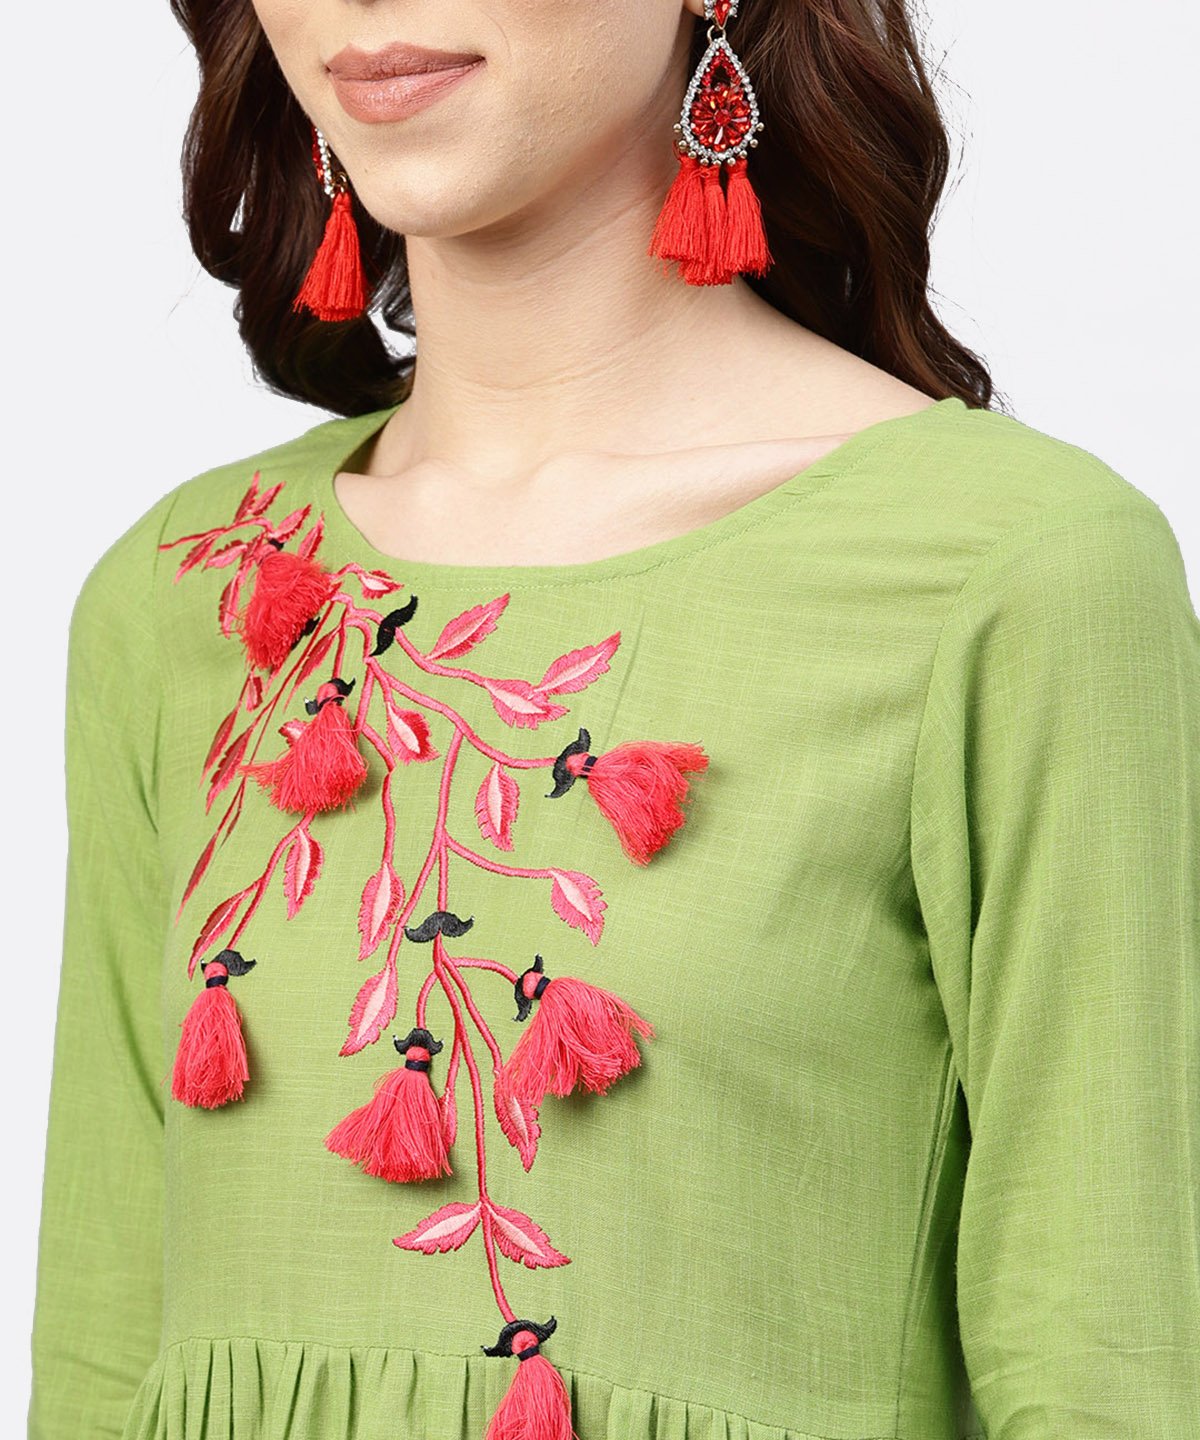 Women's Parrot Green Embroidered A-Line Kurta With  Round Neck And 3/4 Sleeves - Nayo Clothing